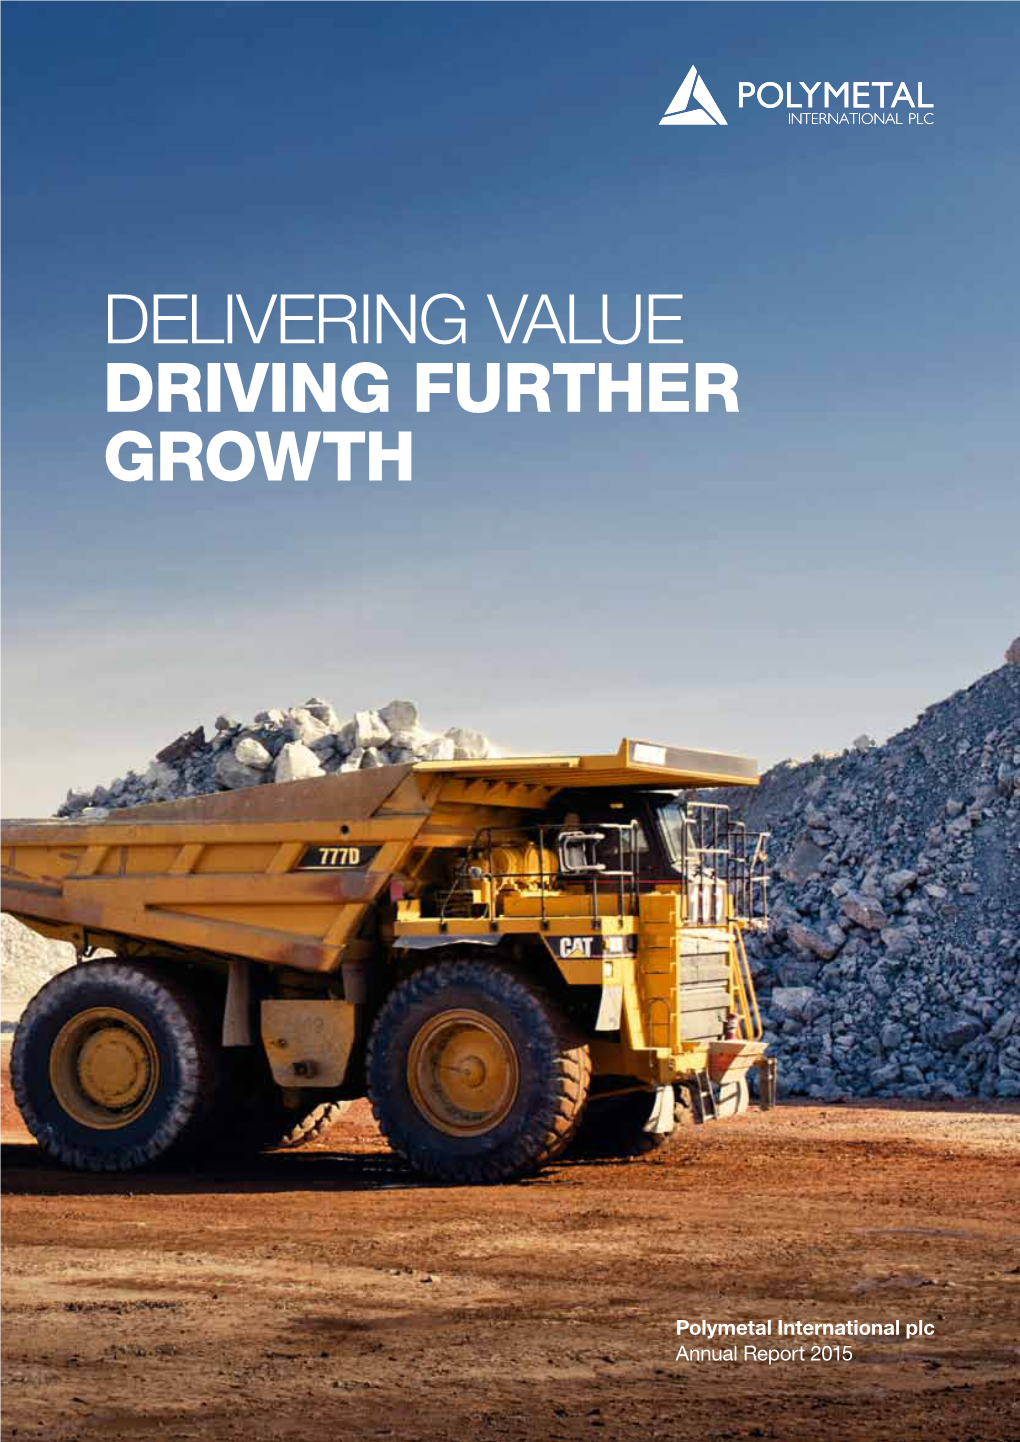 Annual Report 2015 Polymetal Report International Plc Annual Delivering Value Driving Further Growth